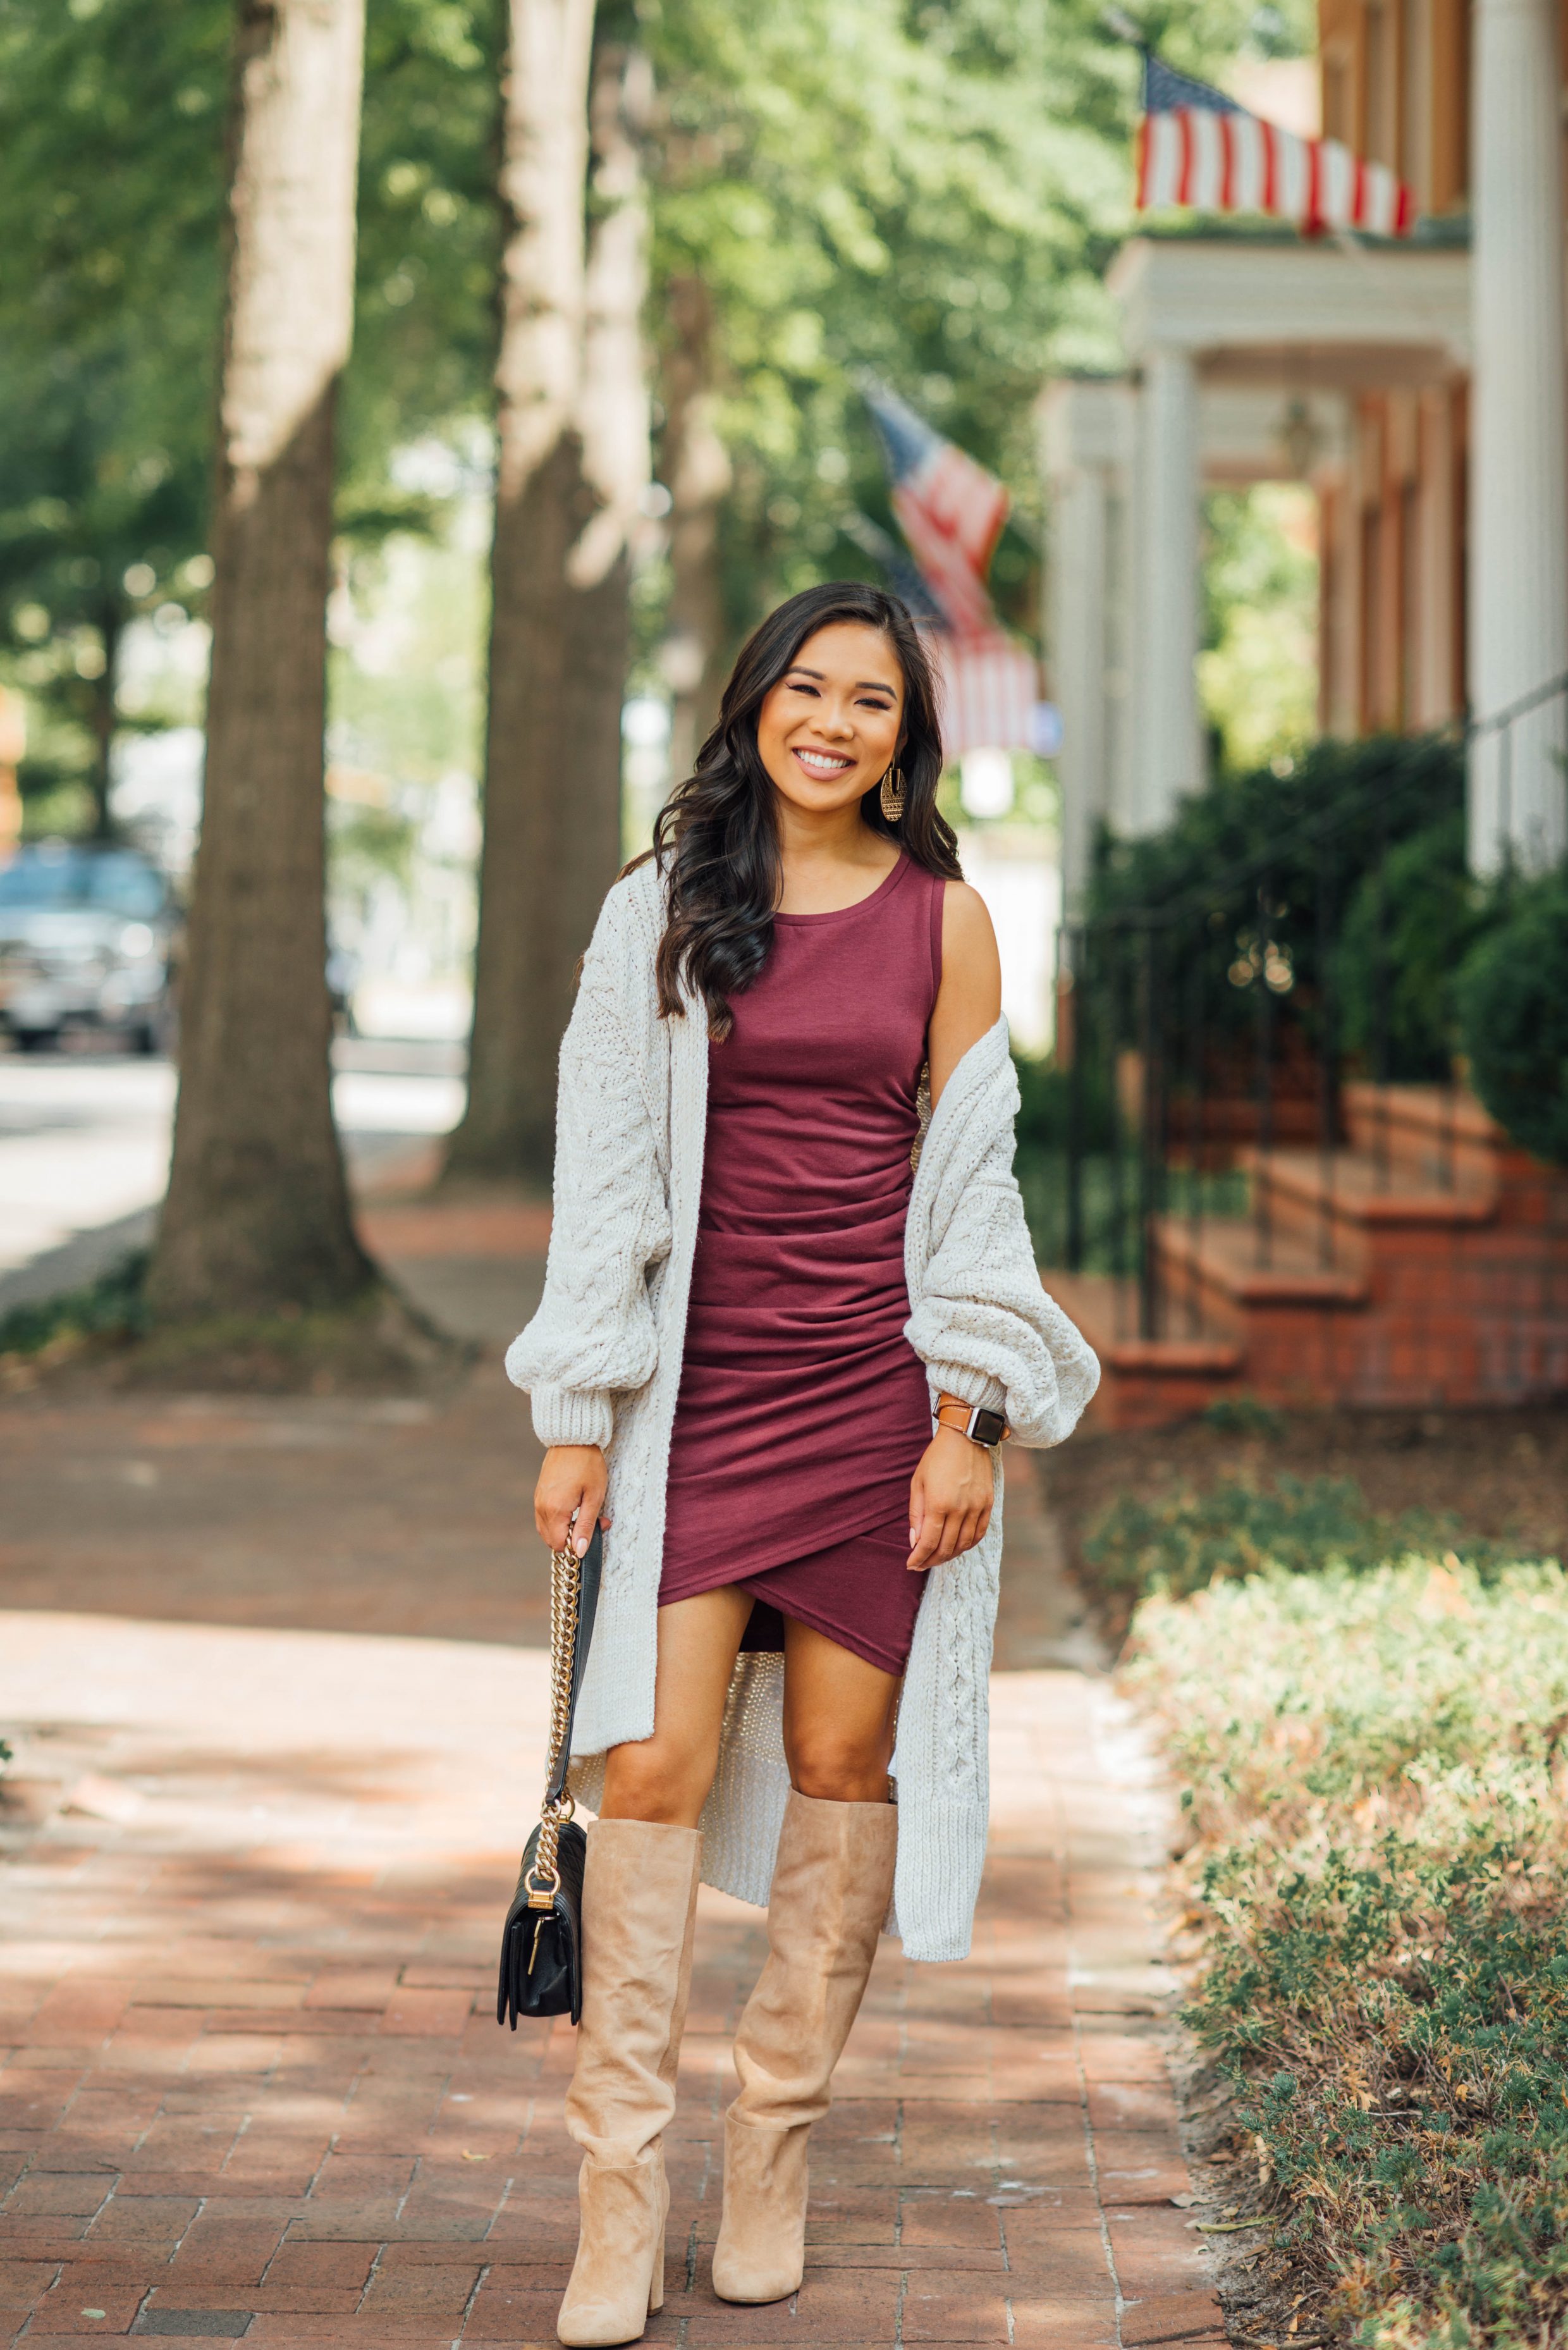 Blogger Hoang-Kim wears a burgundy dress, cream cardigan and knee high boots for fall